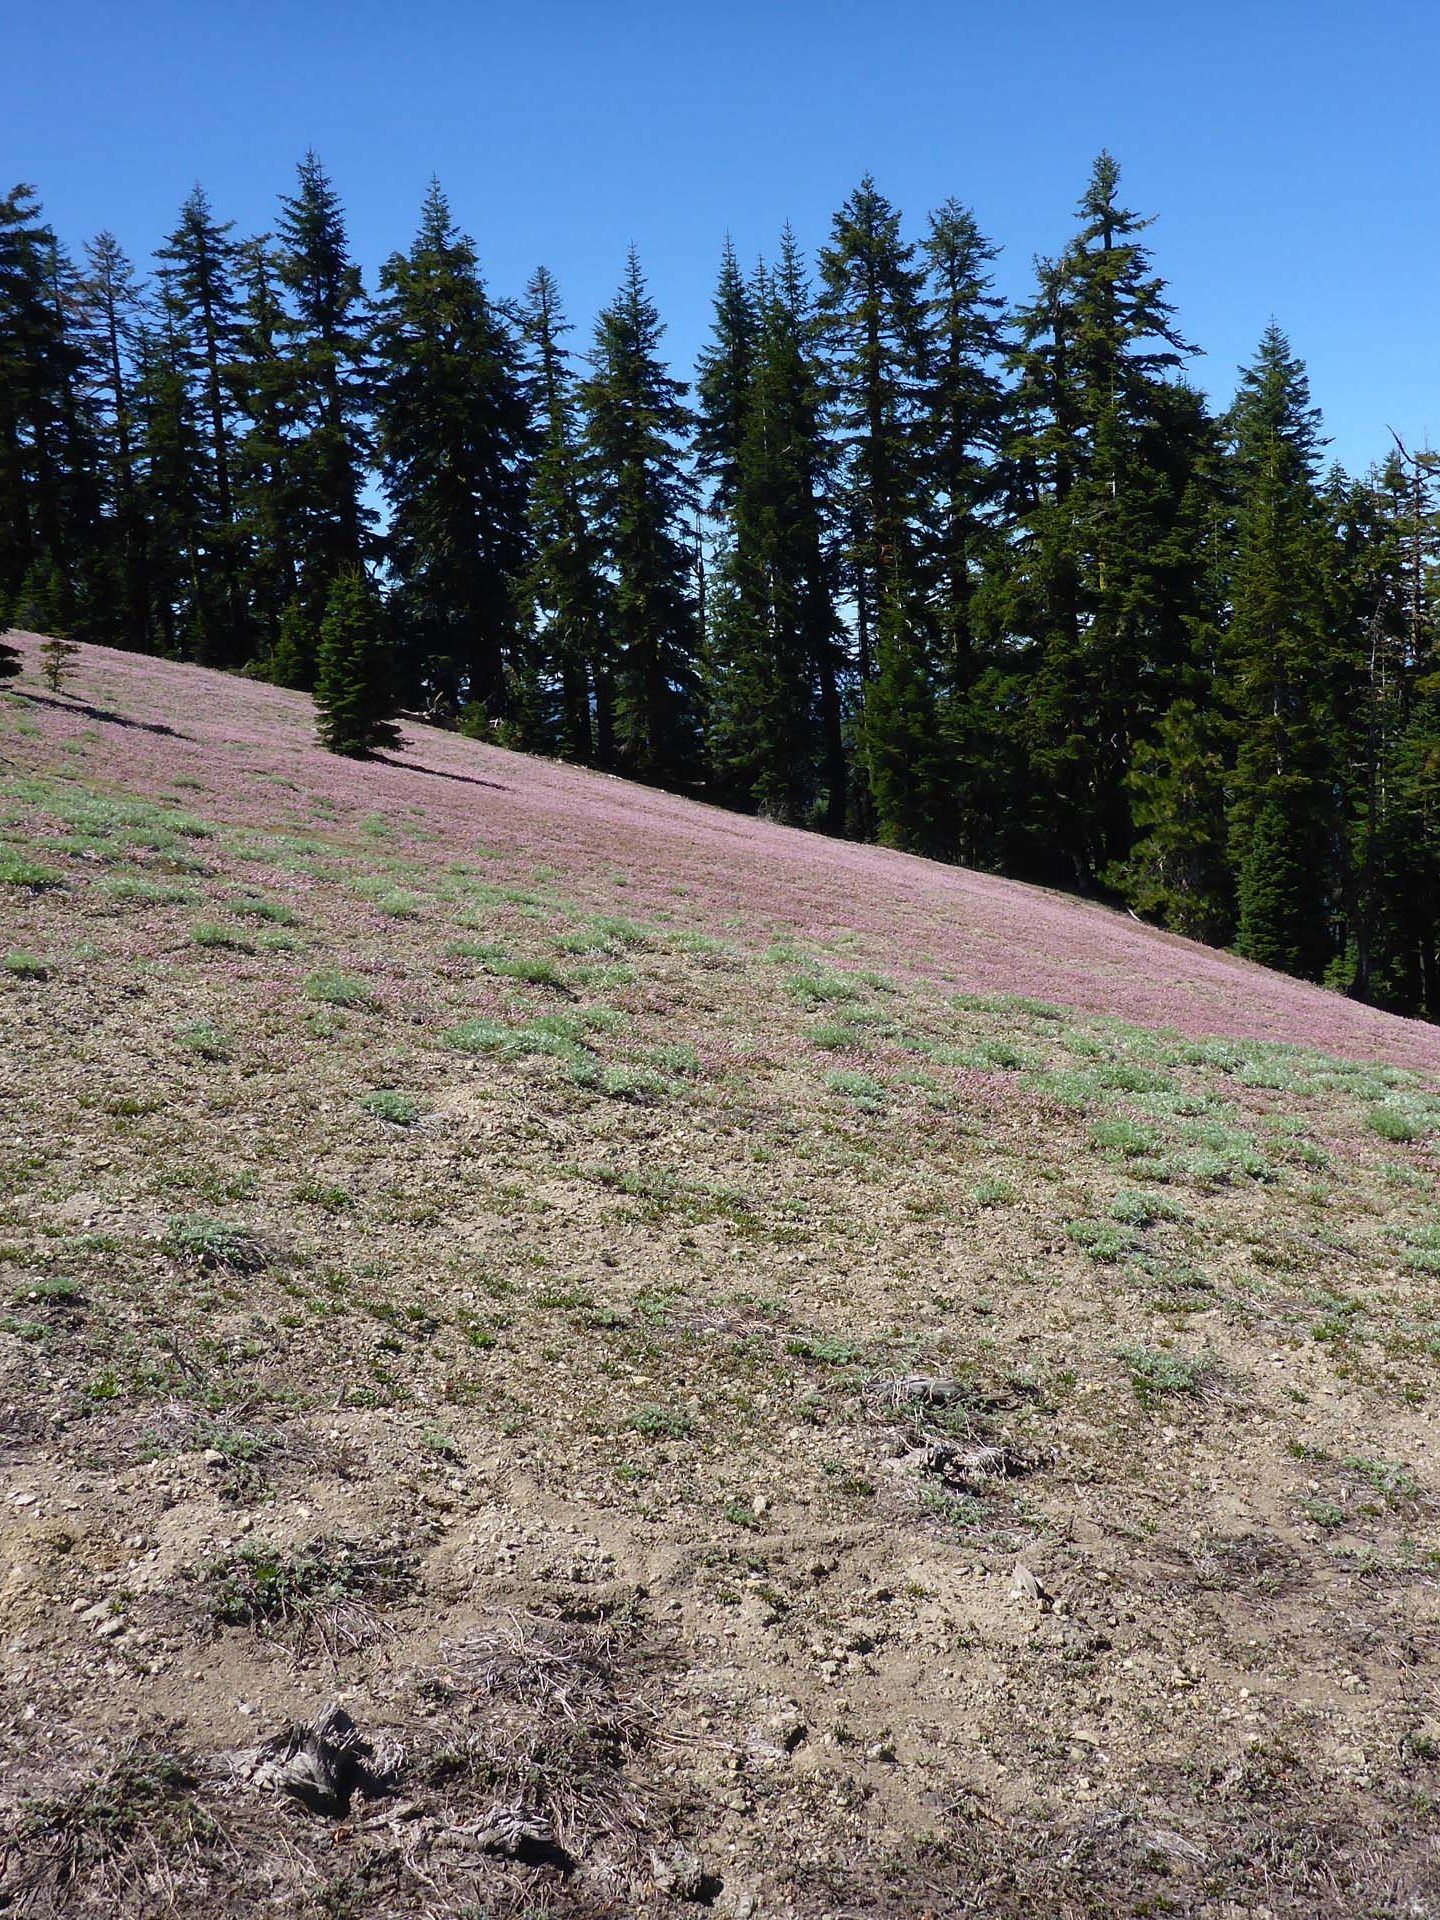 Slope full of one-seeded pussypaws. D. Burk.